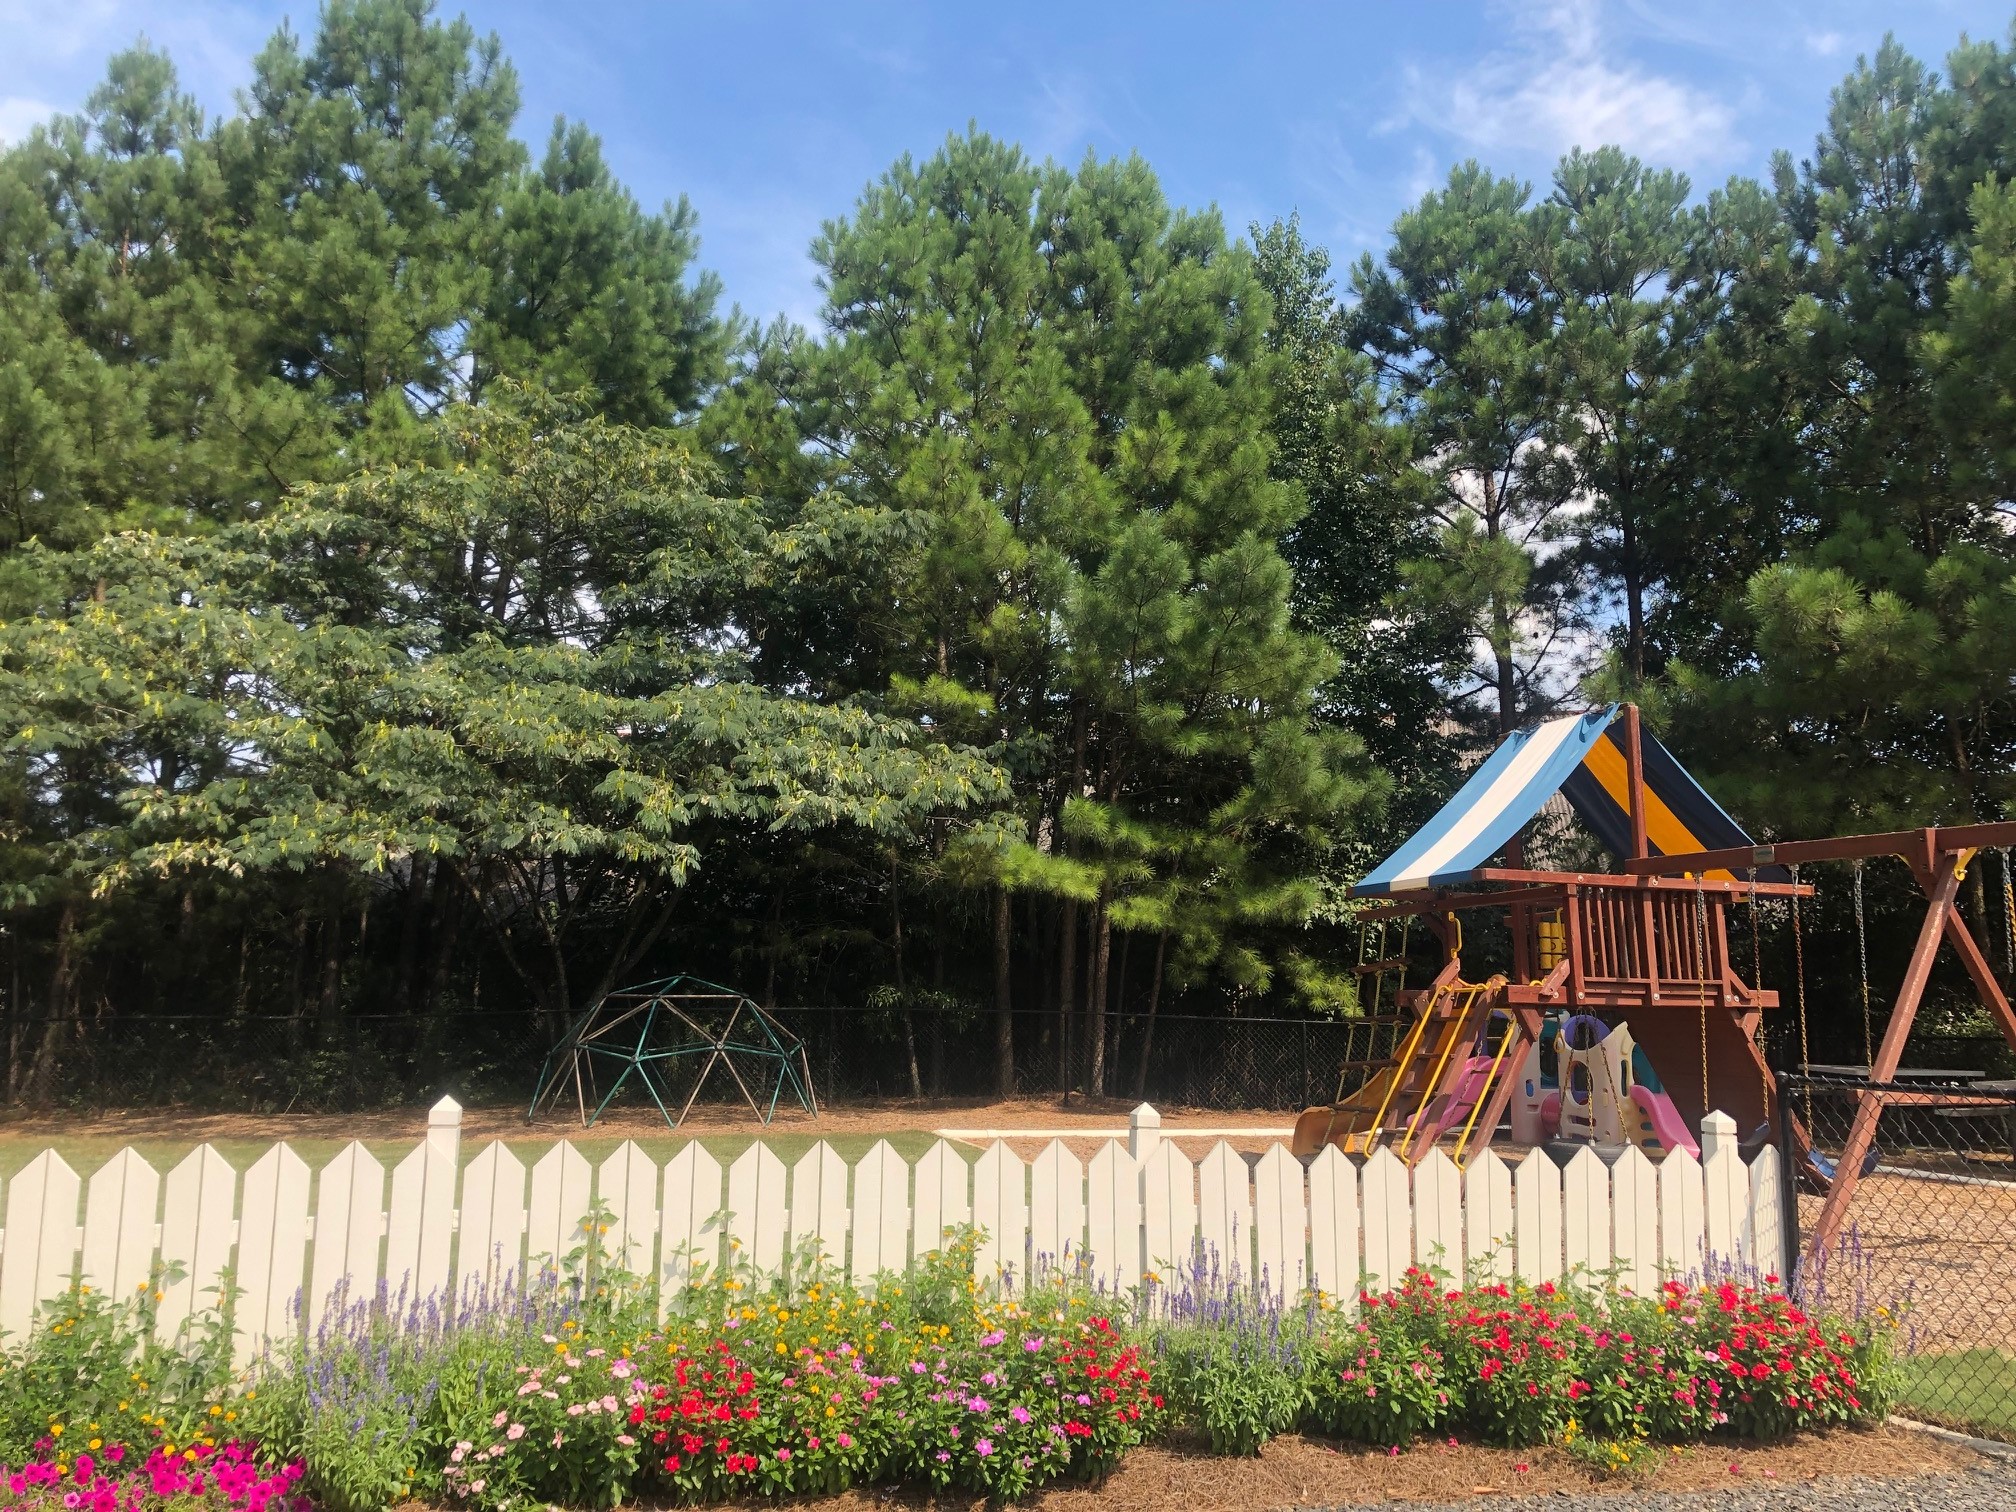 Children love to spend time on the playground after services!